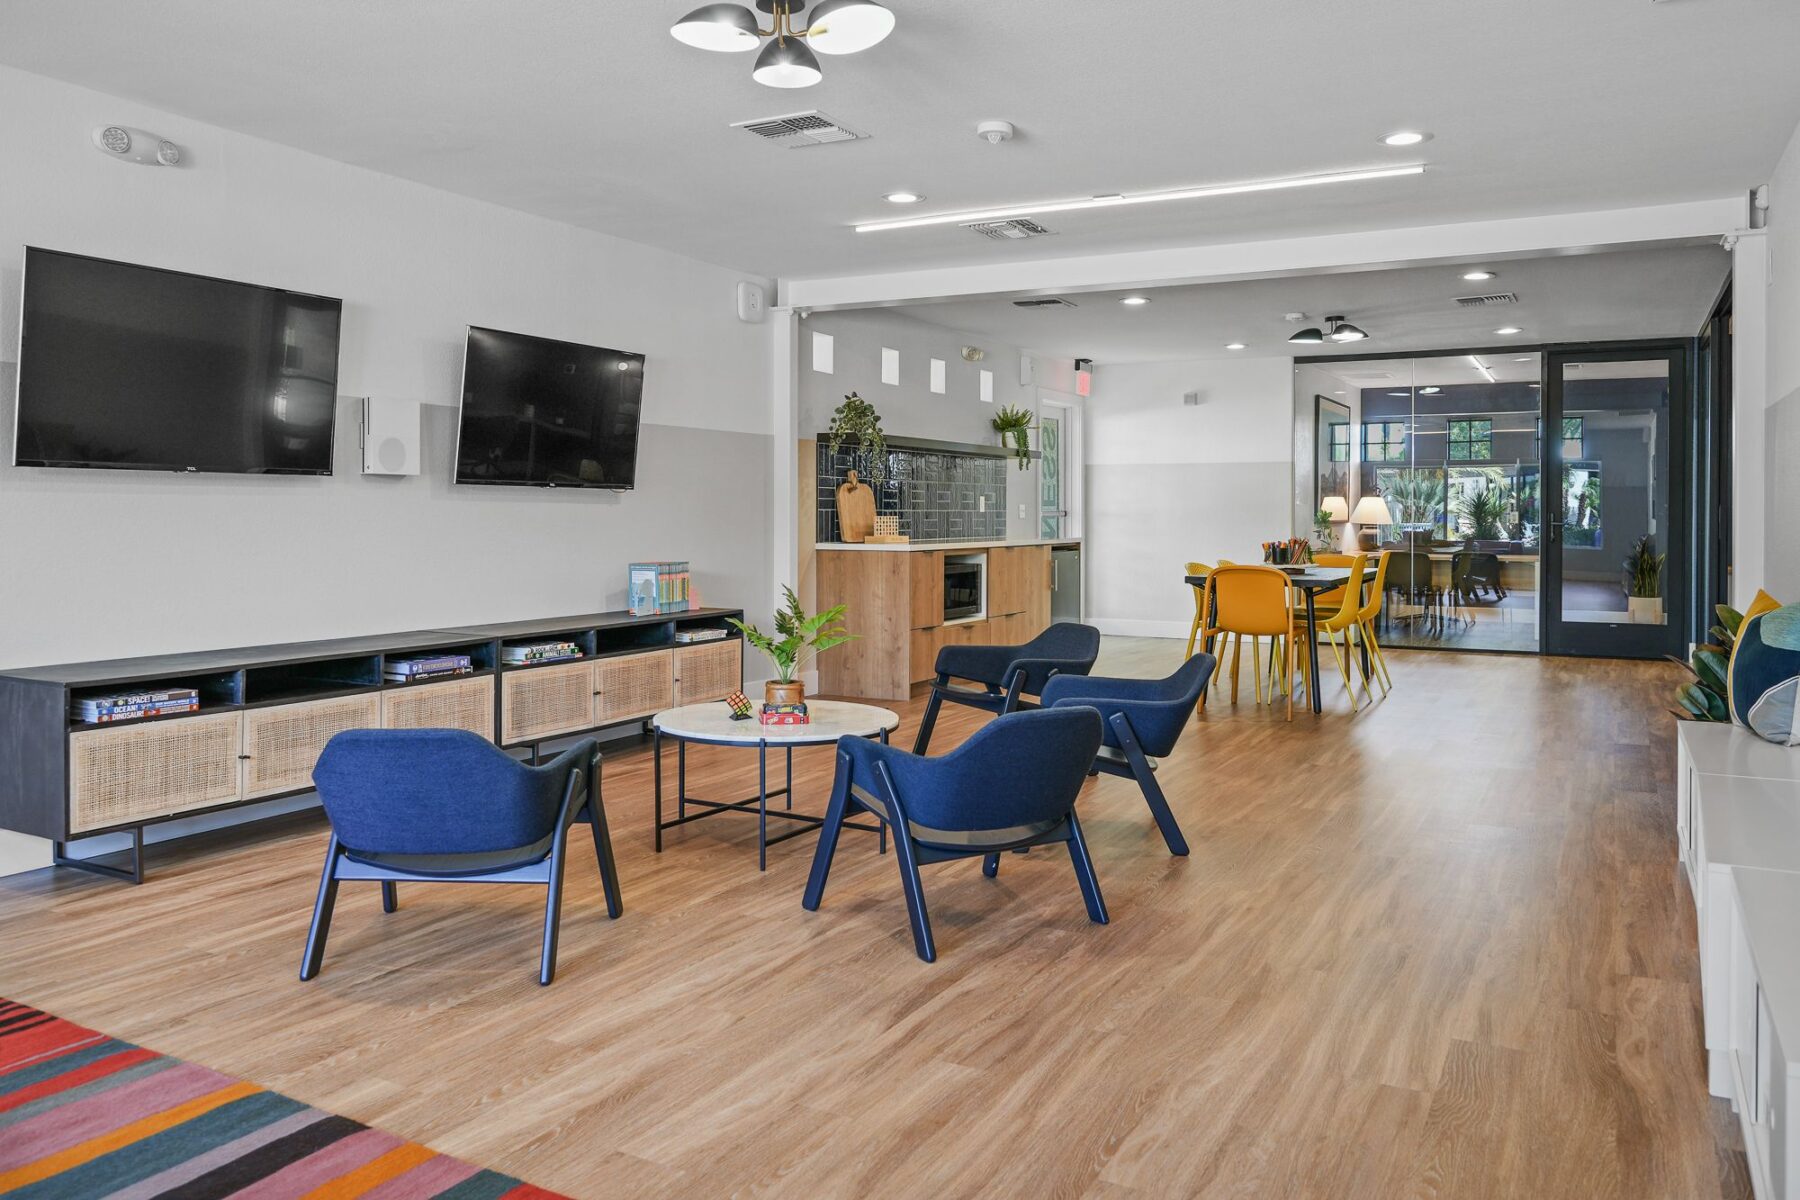 common area with lounge seating, TVs, kitchenette, and private conference room